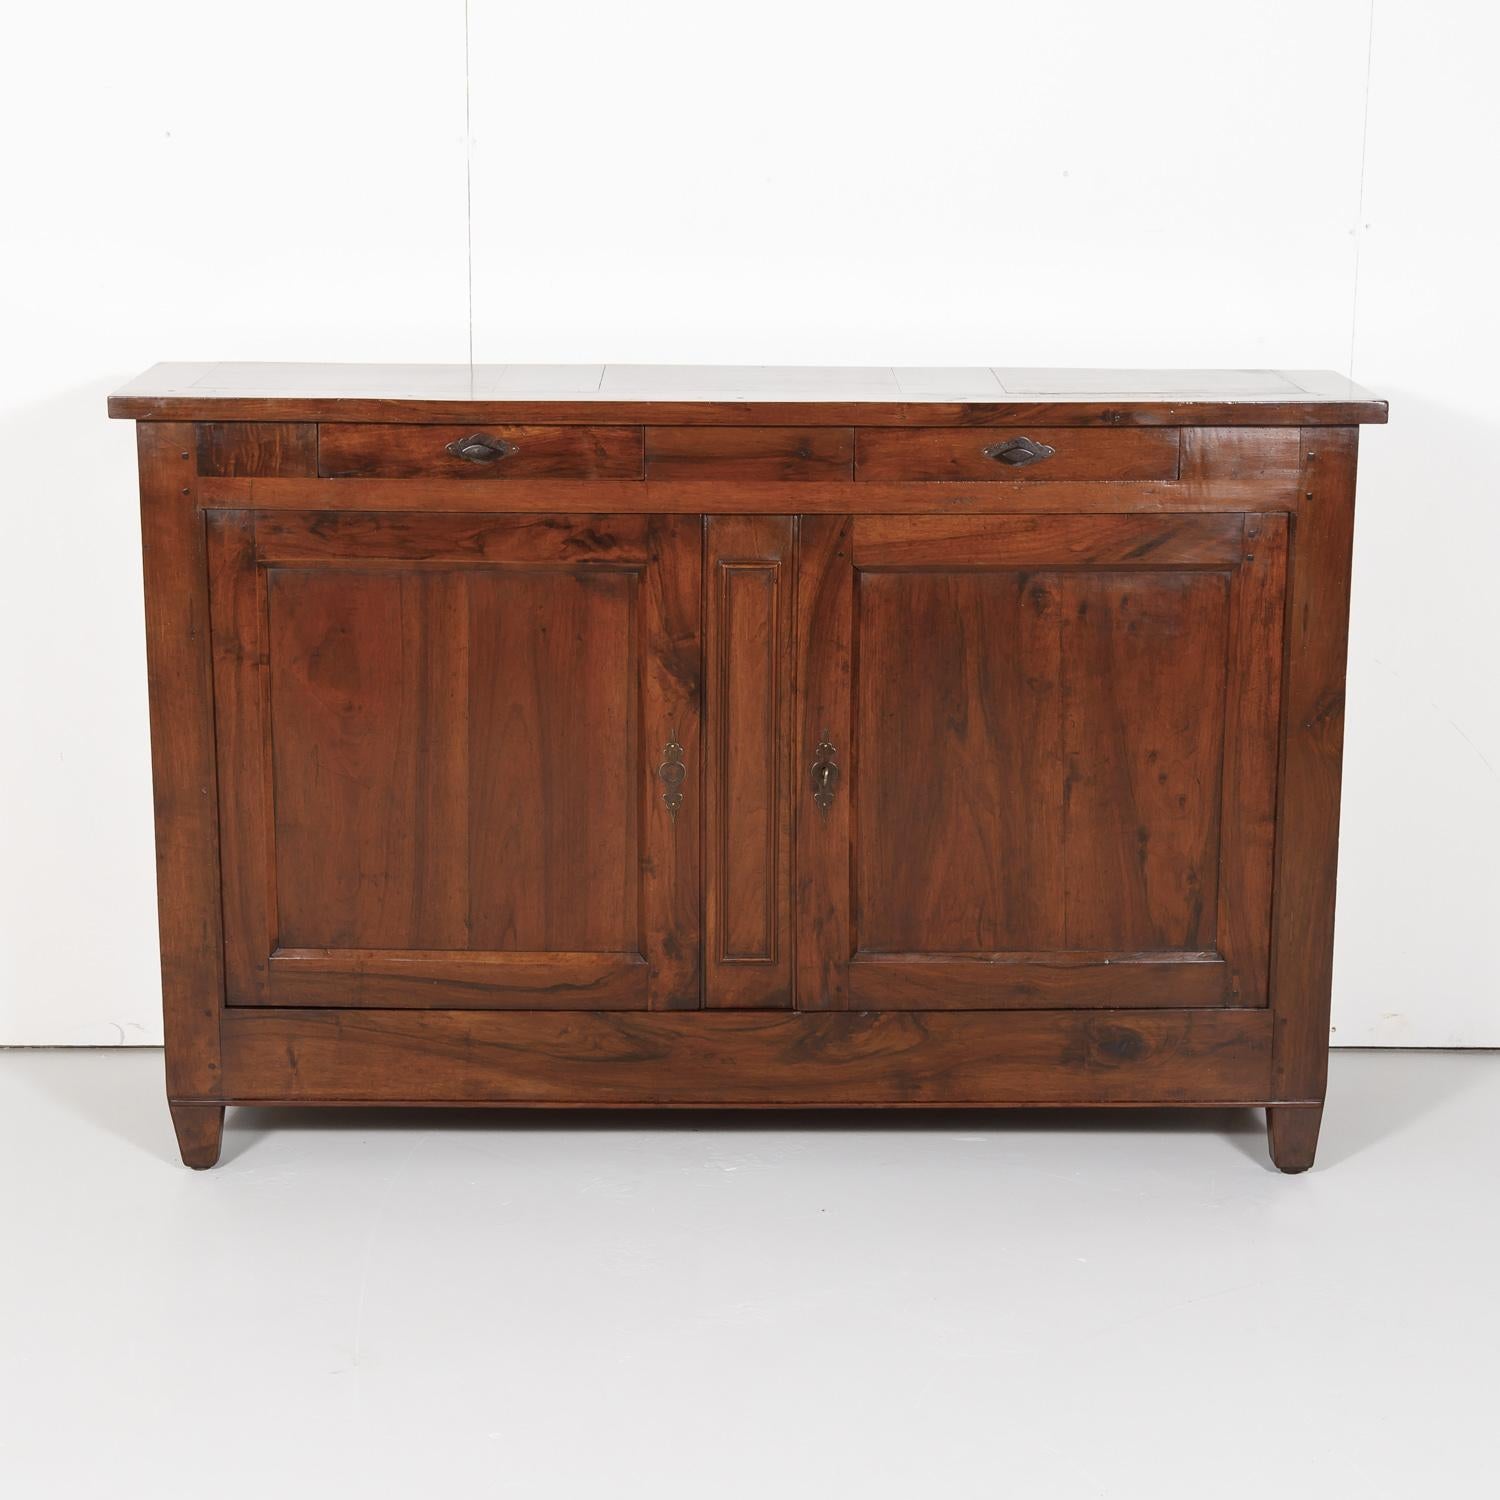 Antique French country Directoire period buffet handcrafted in Lyon during the late 1700s-early 1800s of solid old growth French walnut having a rectangular top above two drawers and two panel doors with original iron hardware that open to reveal a